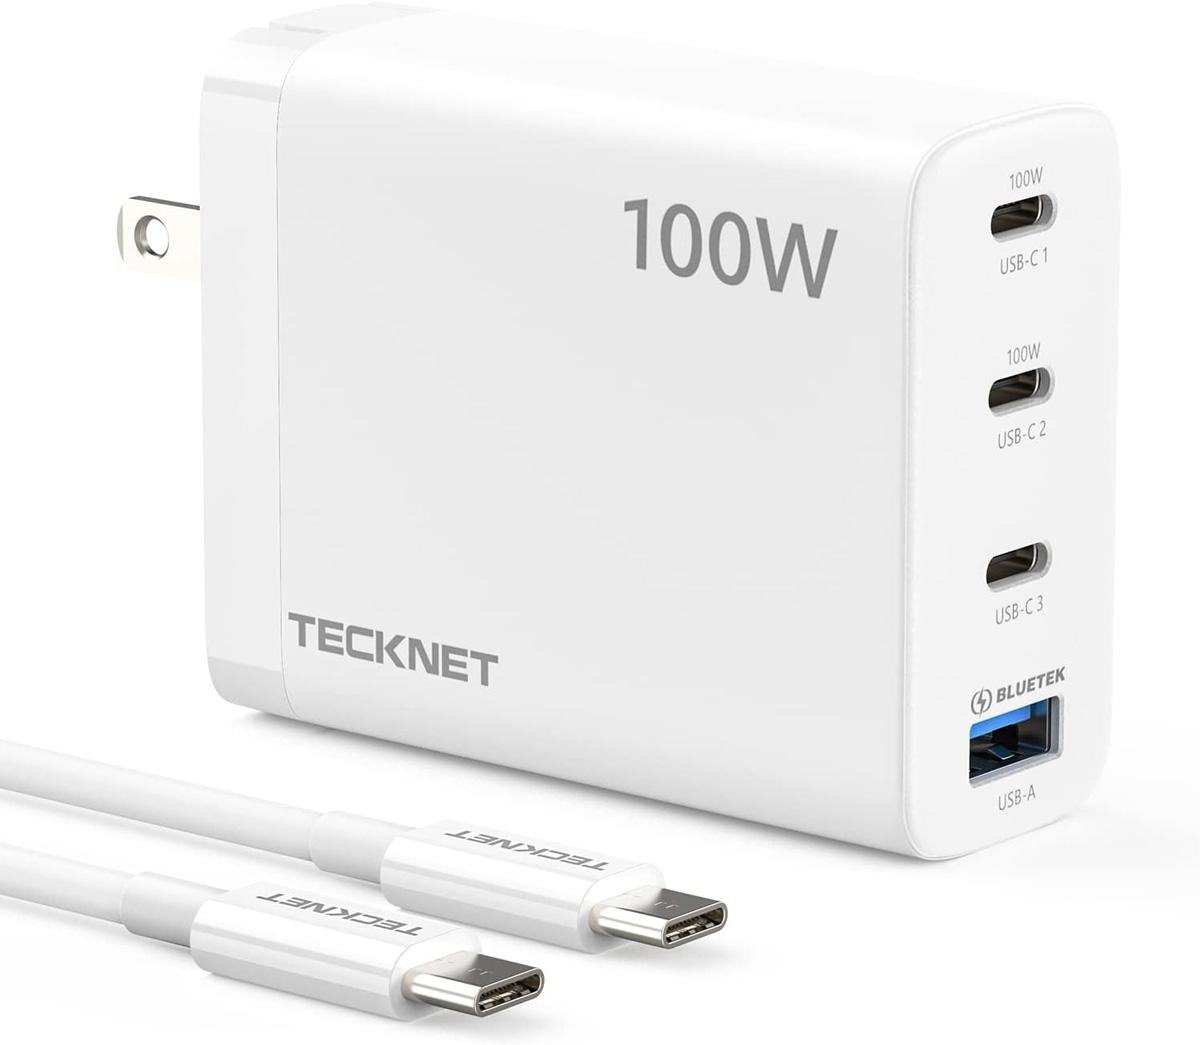 Tecknet 100W USB-C and USB-A Wall Charger for $24.99